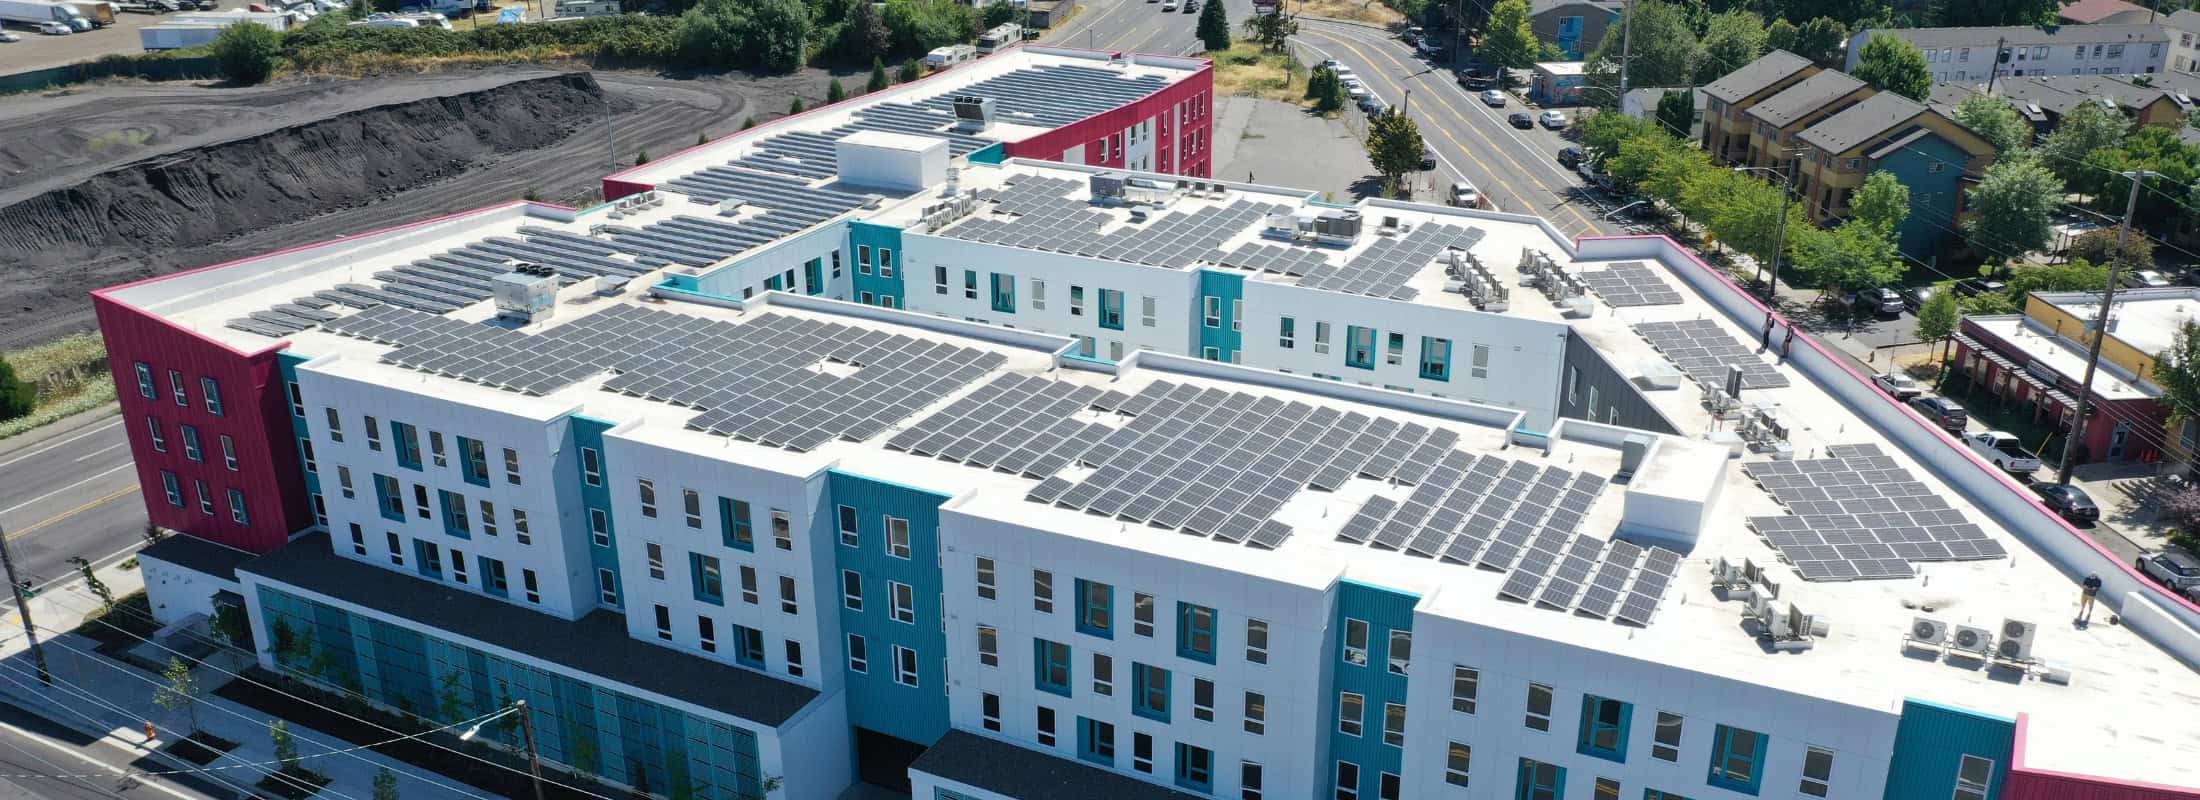 A large apartment building in Portland, Oregon with a solar energy system from Neil Kelly Solar